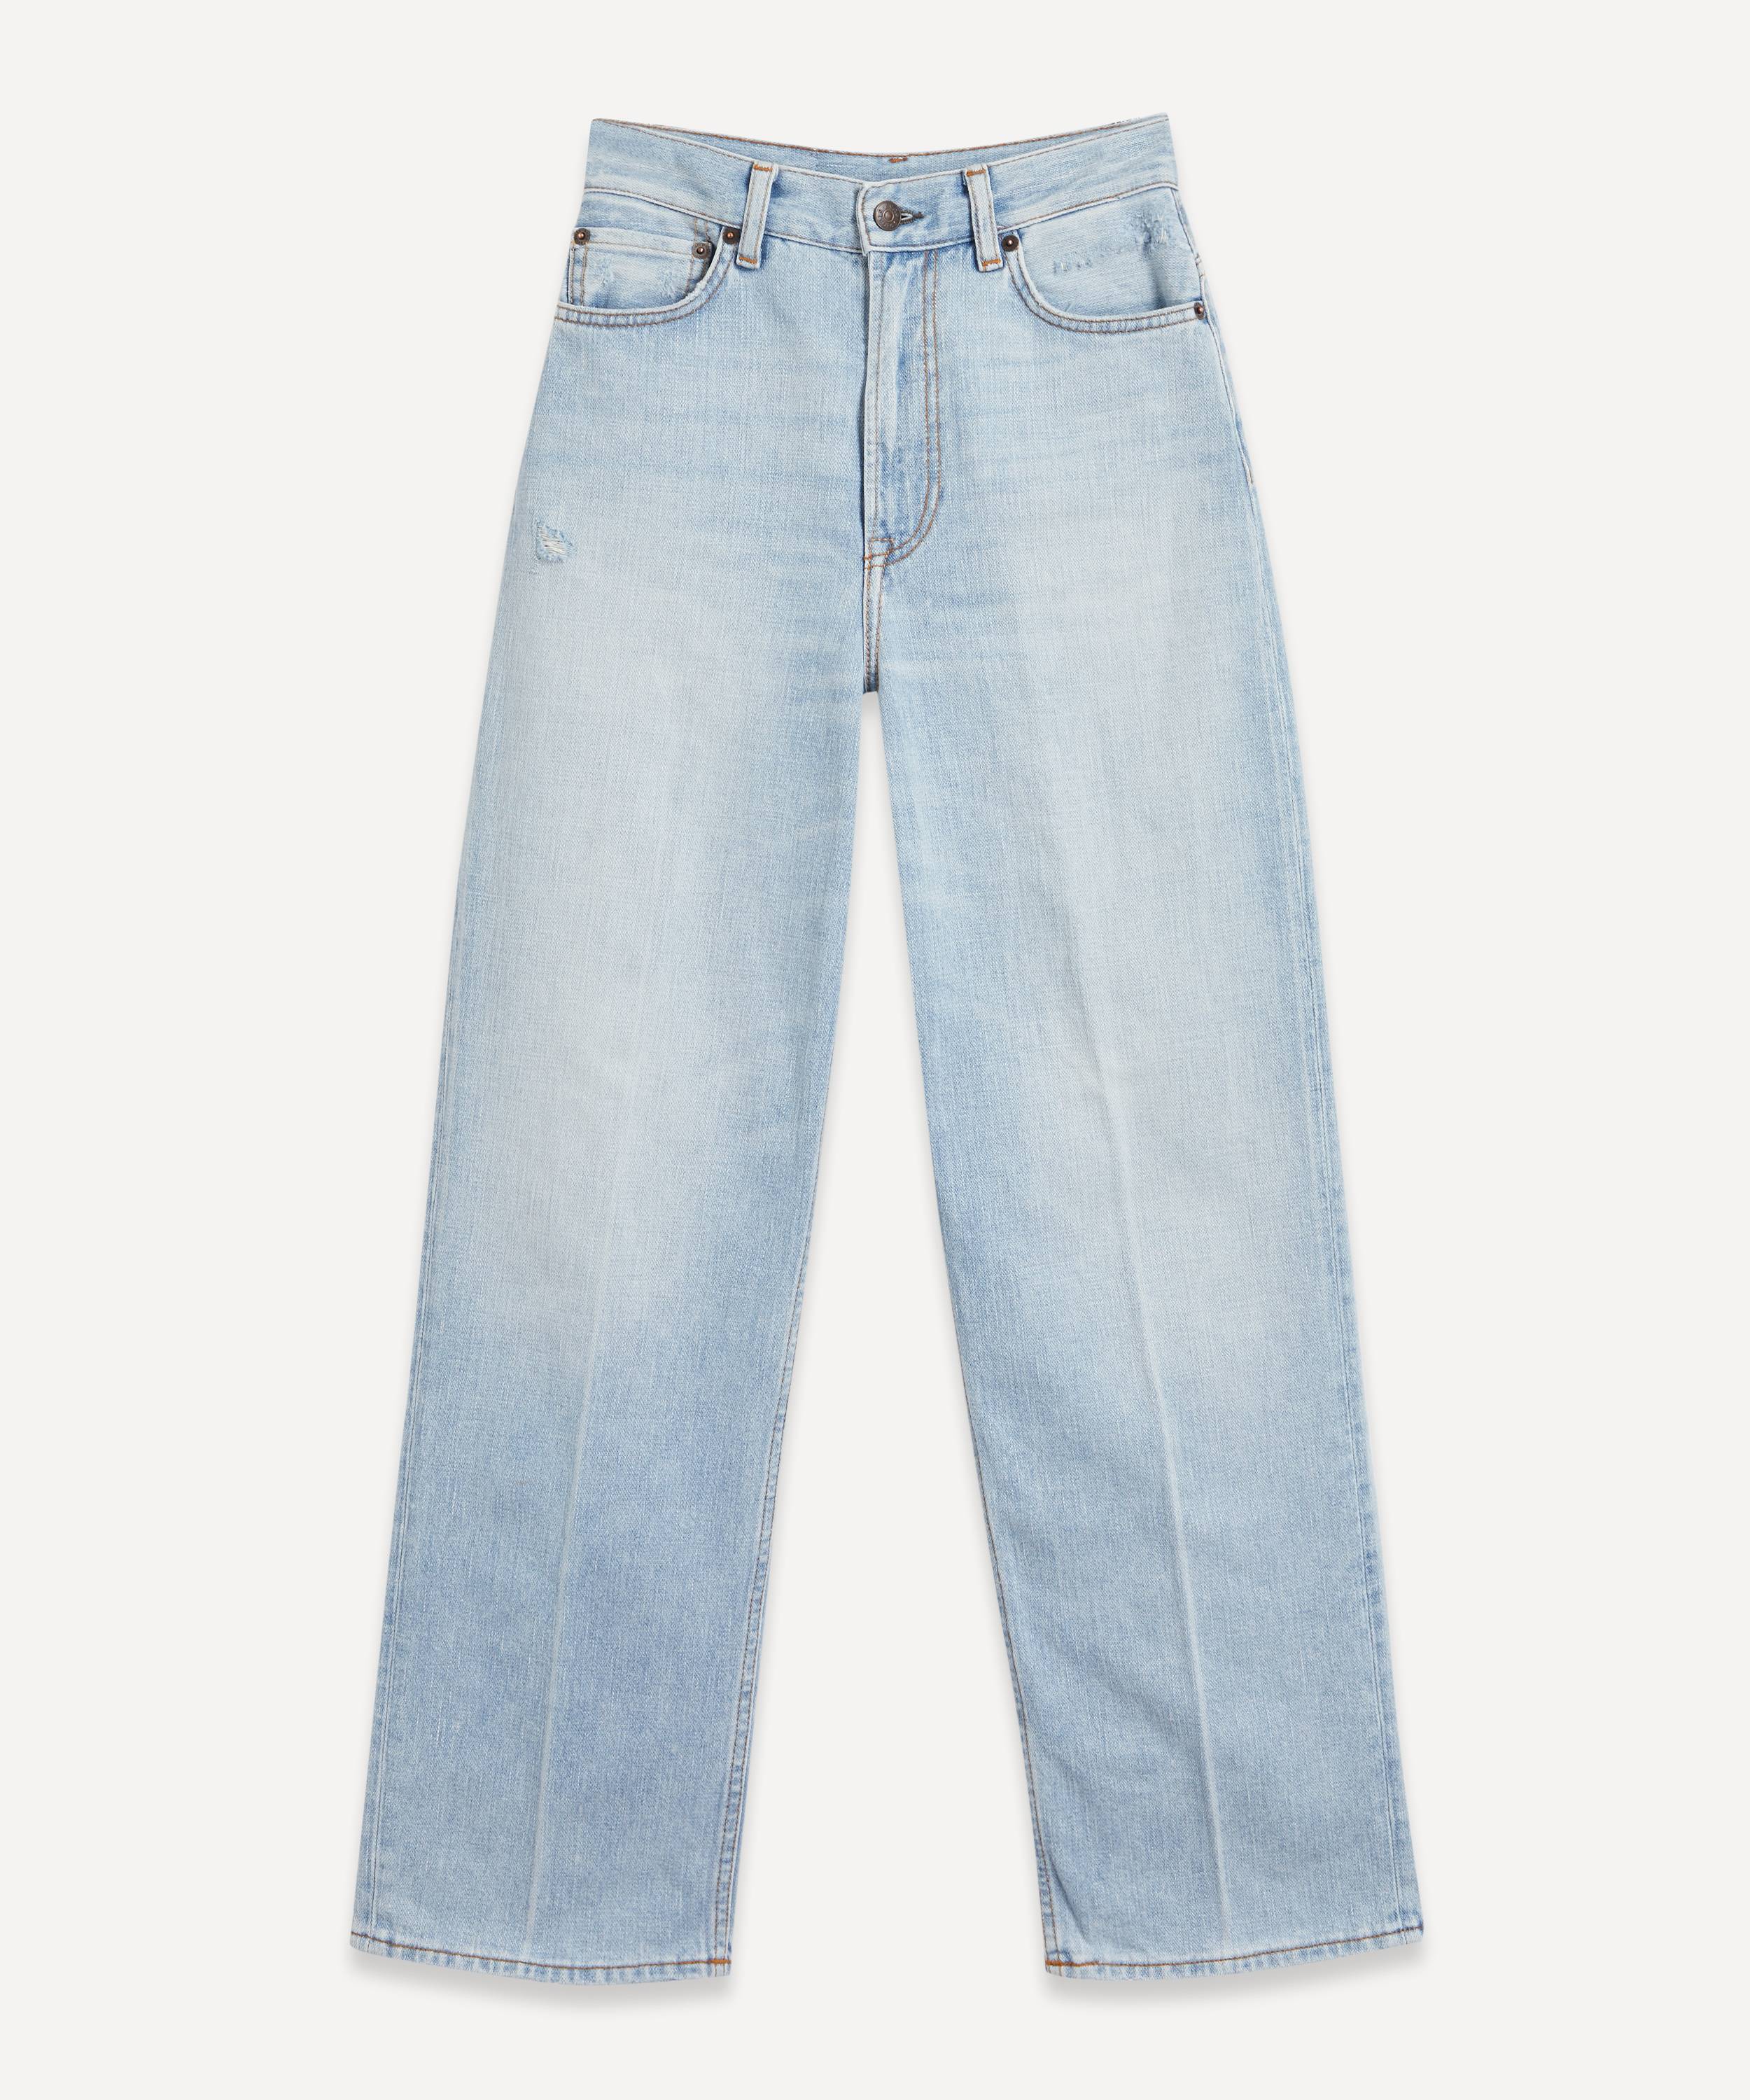 Acne Studios 1993 Pale Crease Relaxed Fit Jeans | Liberty